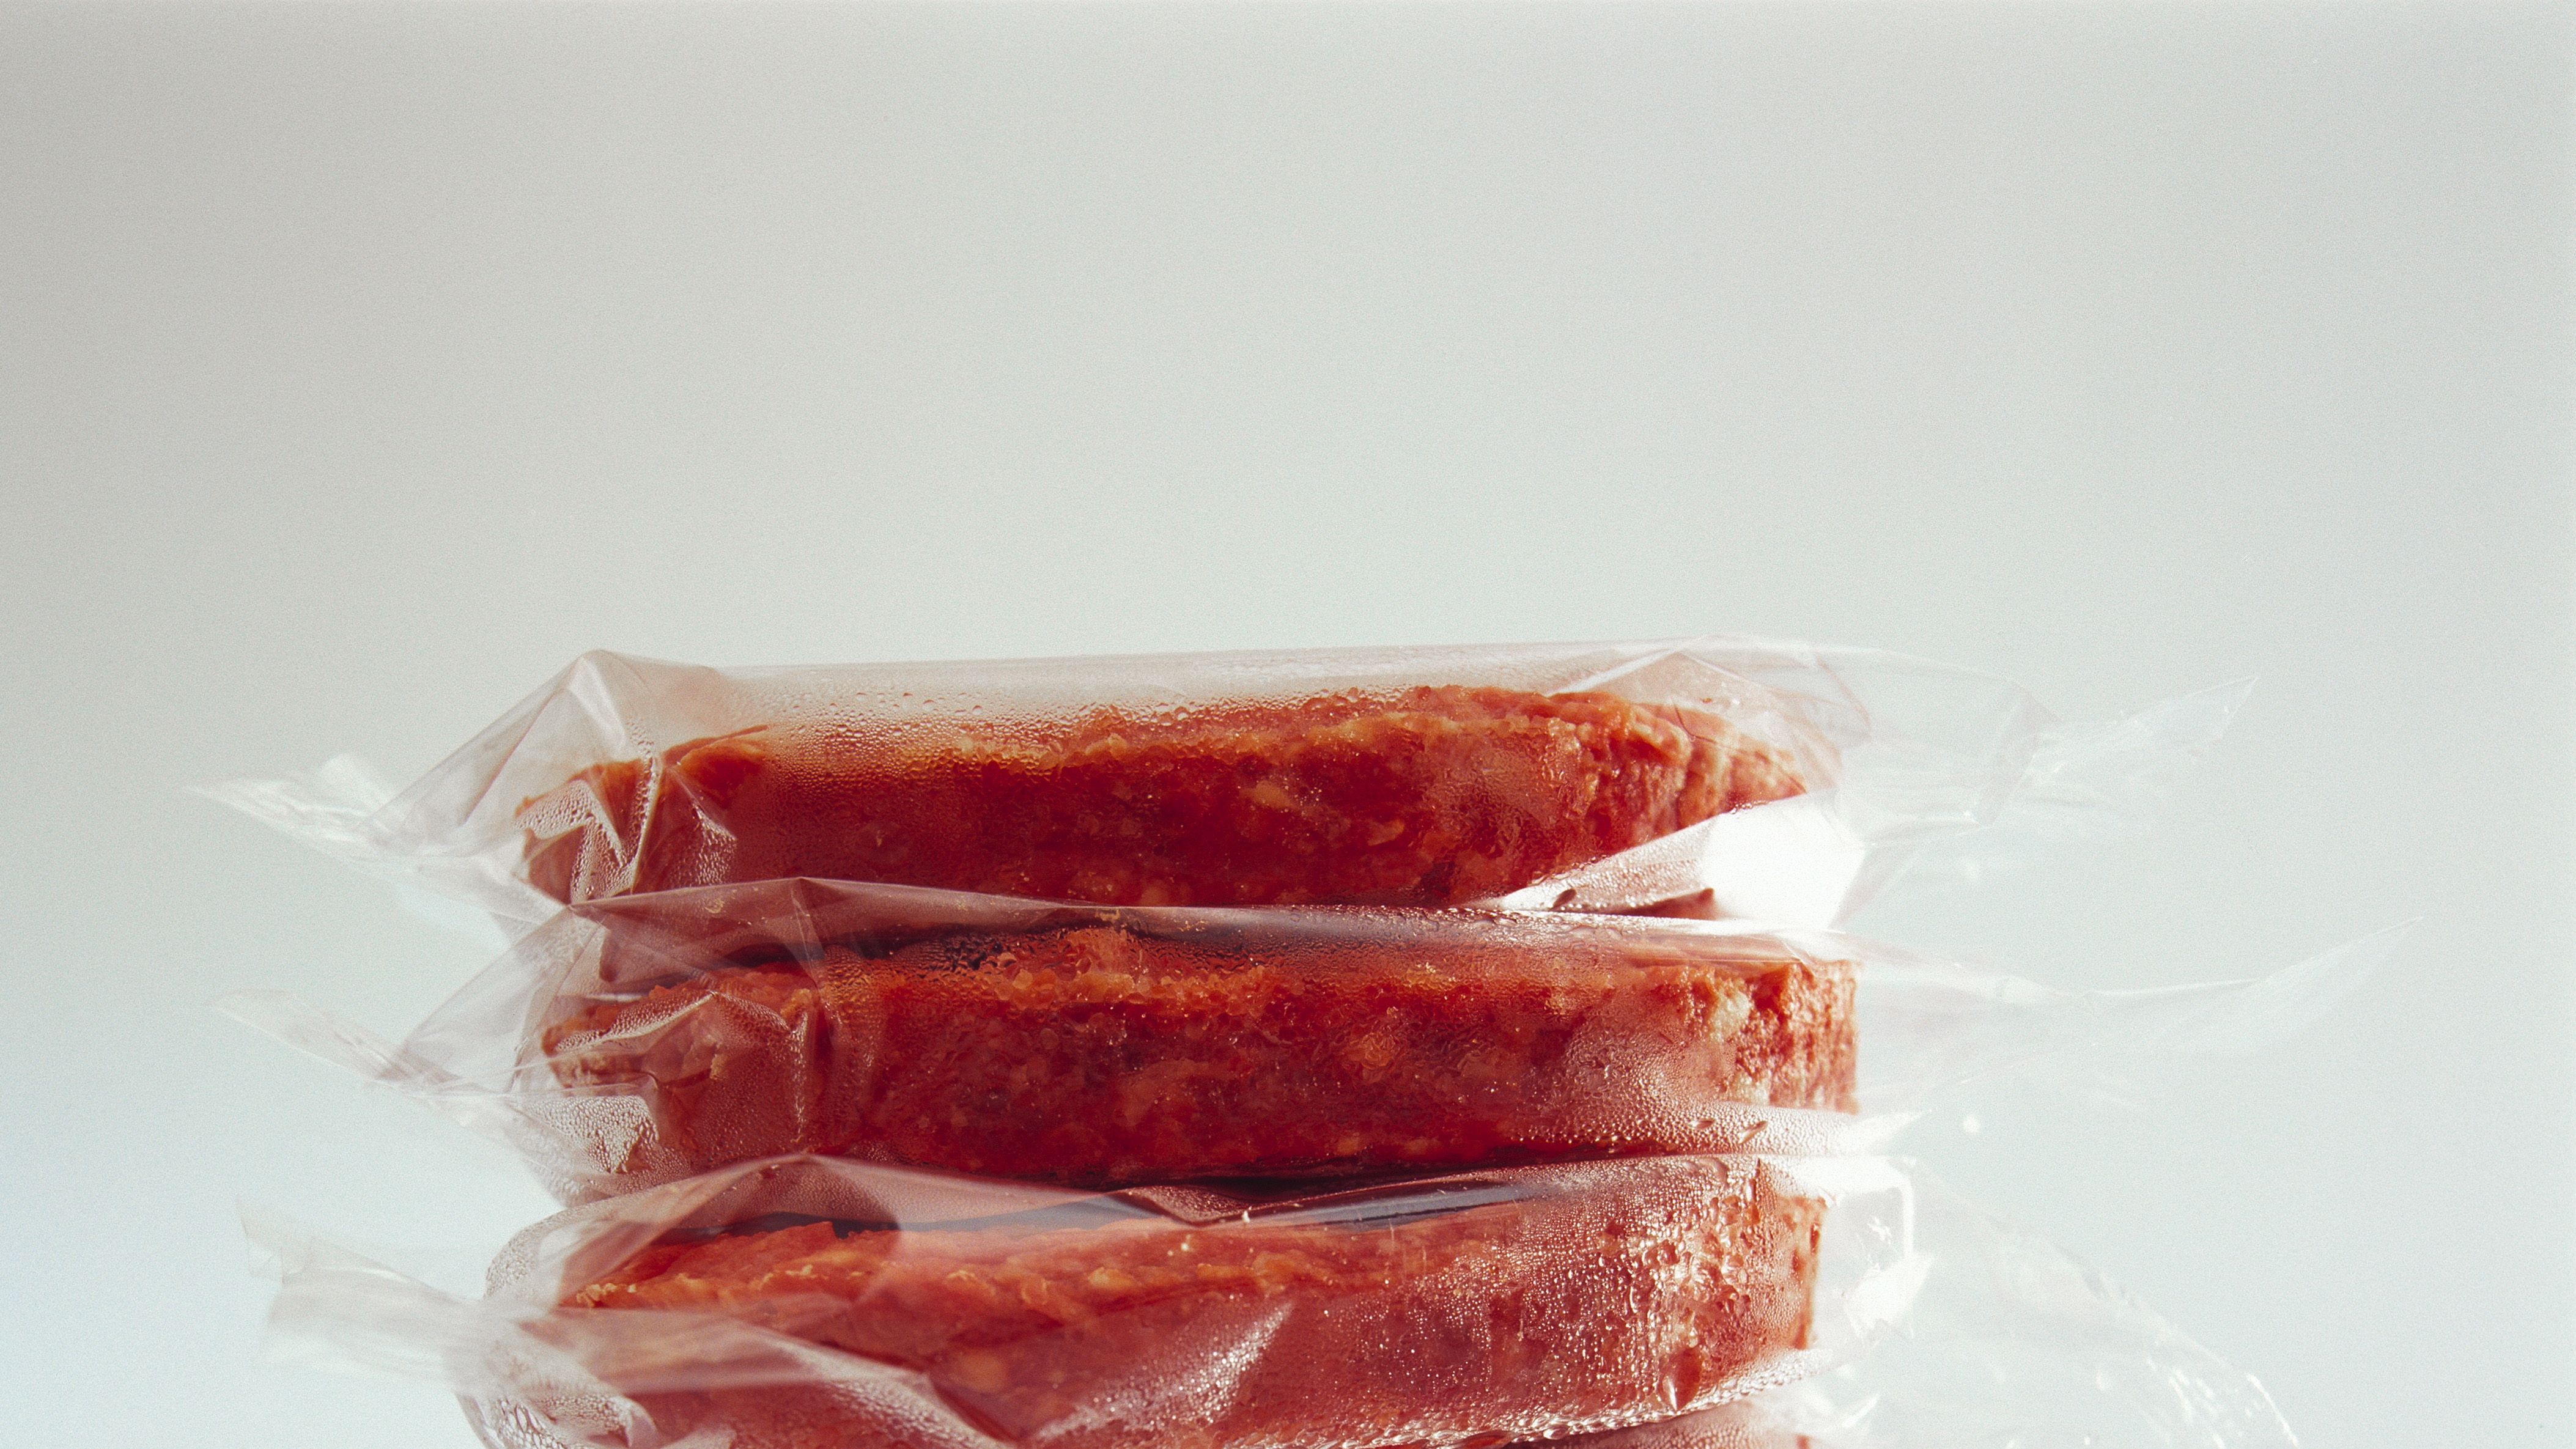 Is it necessary to re-wrap meats before freezing?